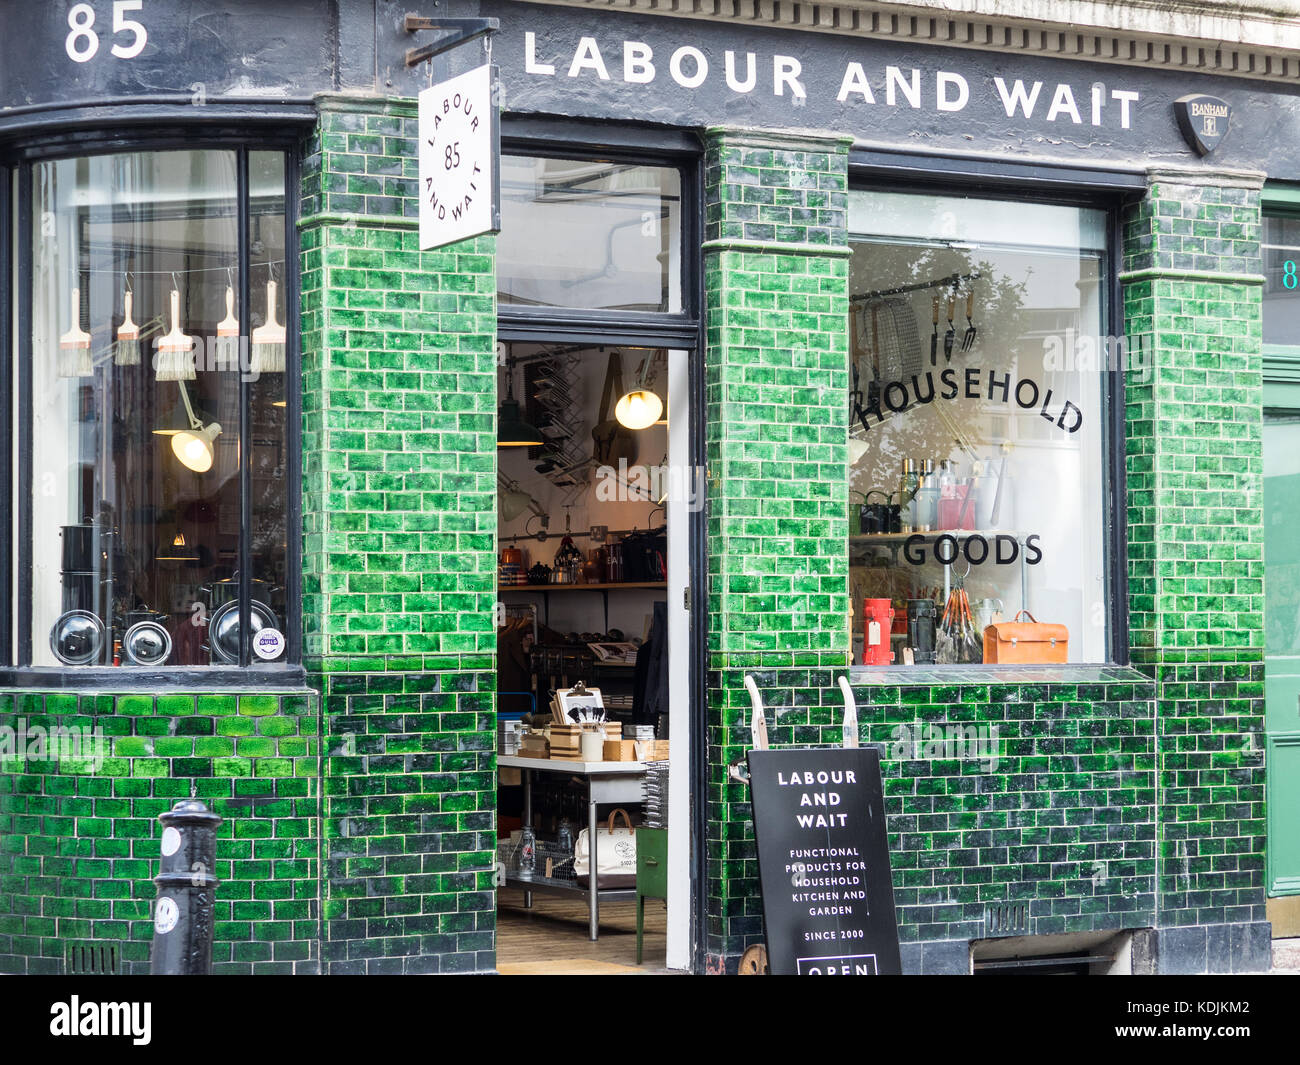 Labour and Wait traditional household goods store in fashionable Shoreditch in London's East End Stock Photo